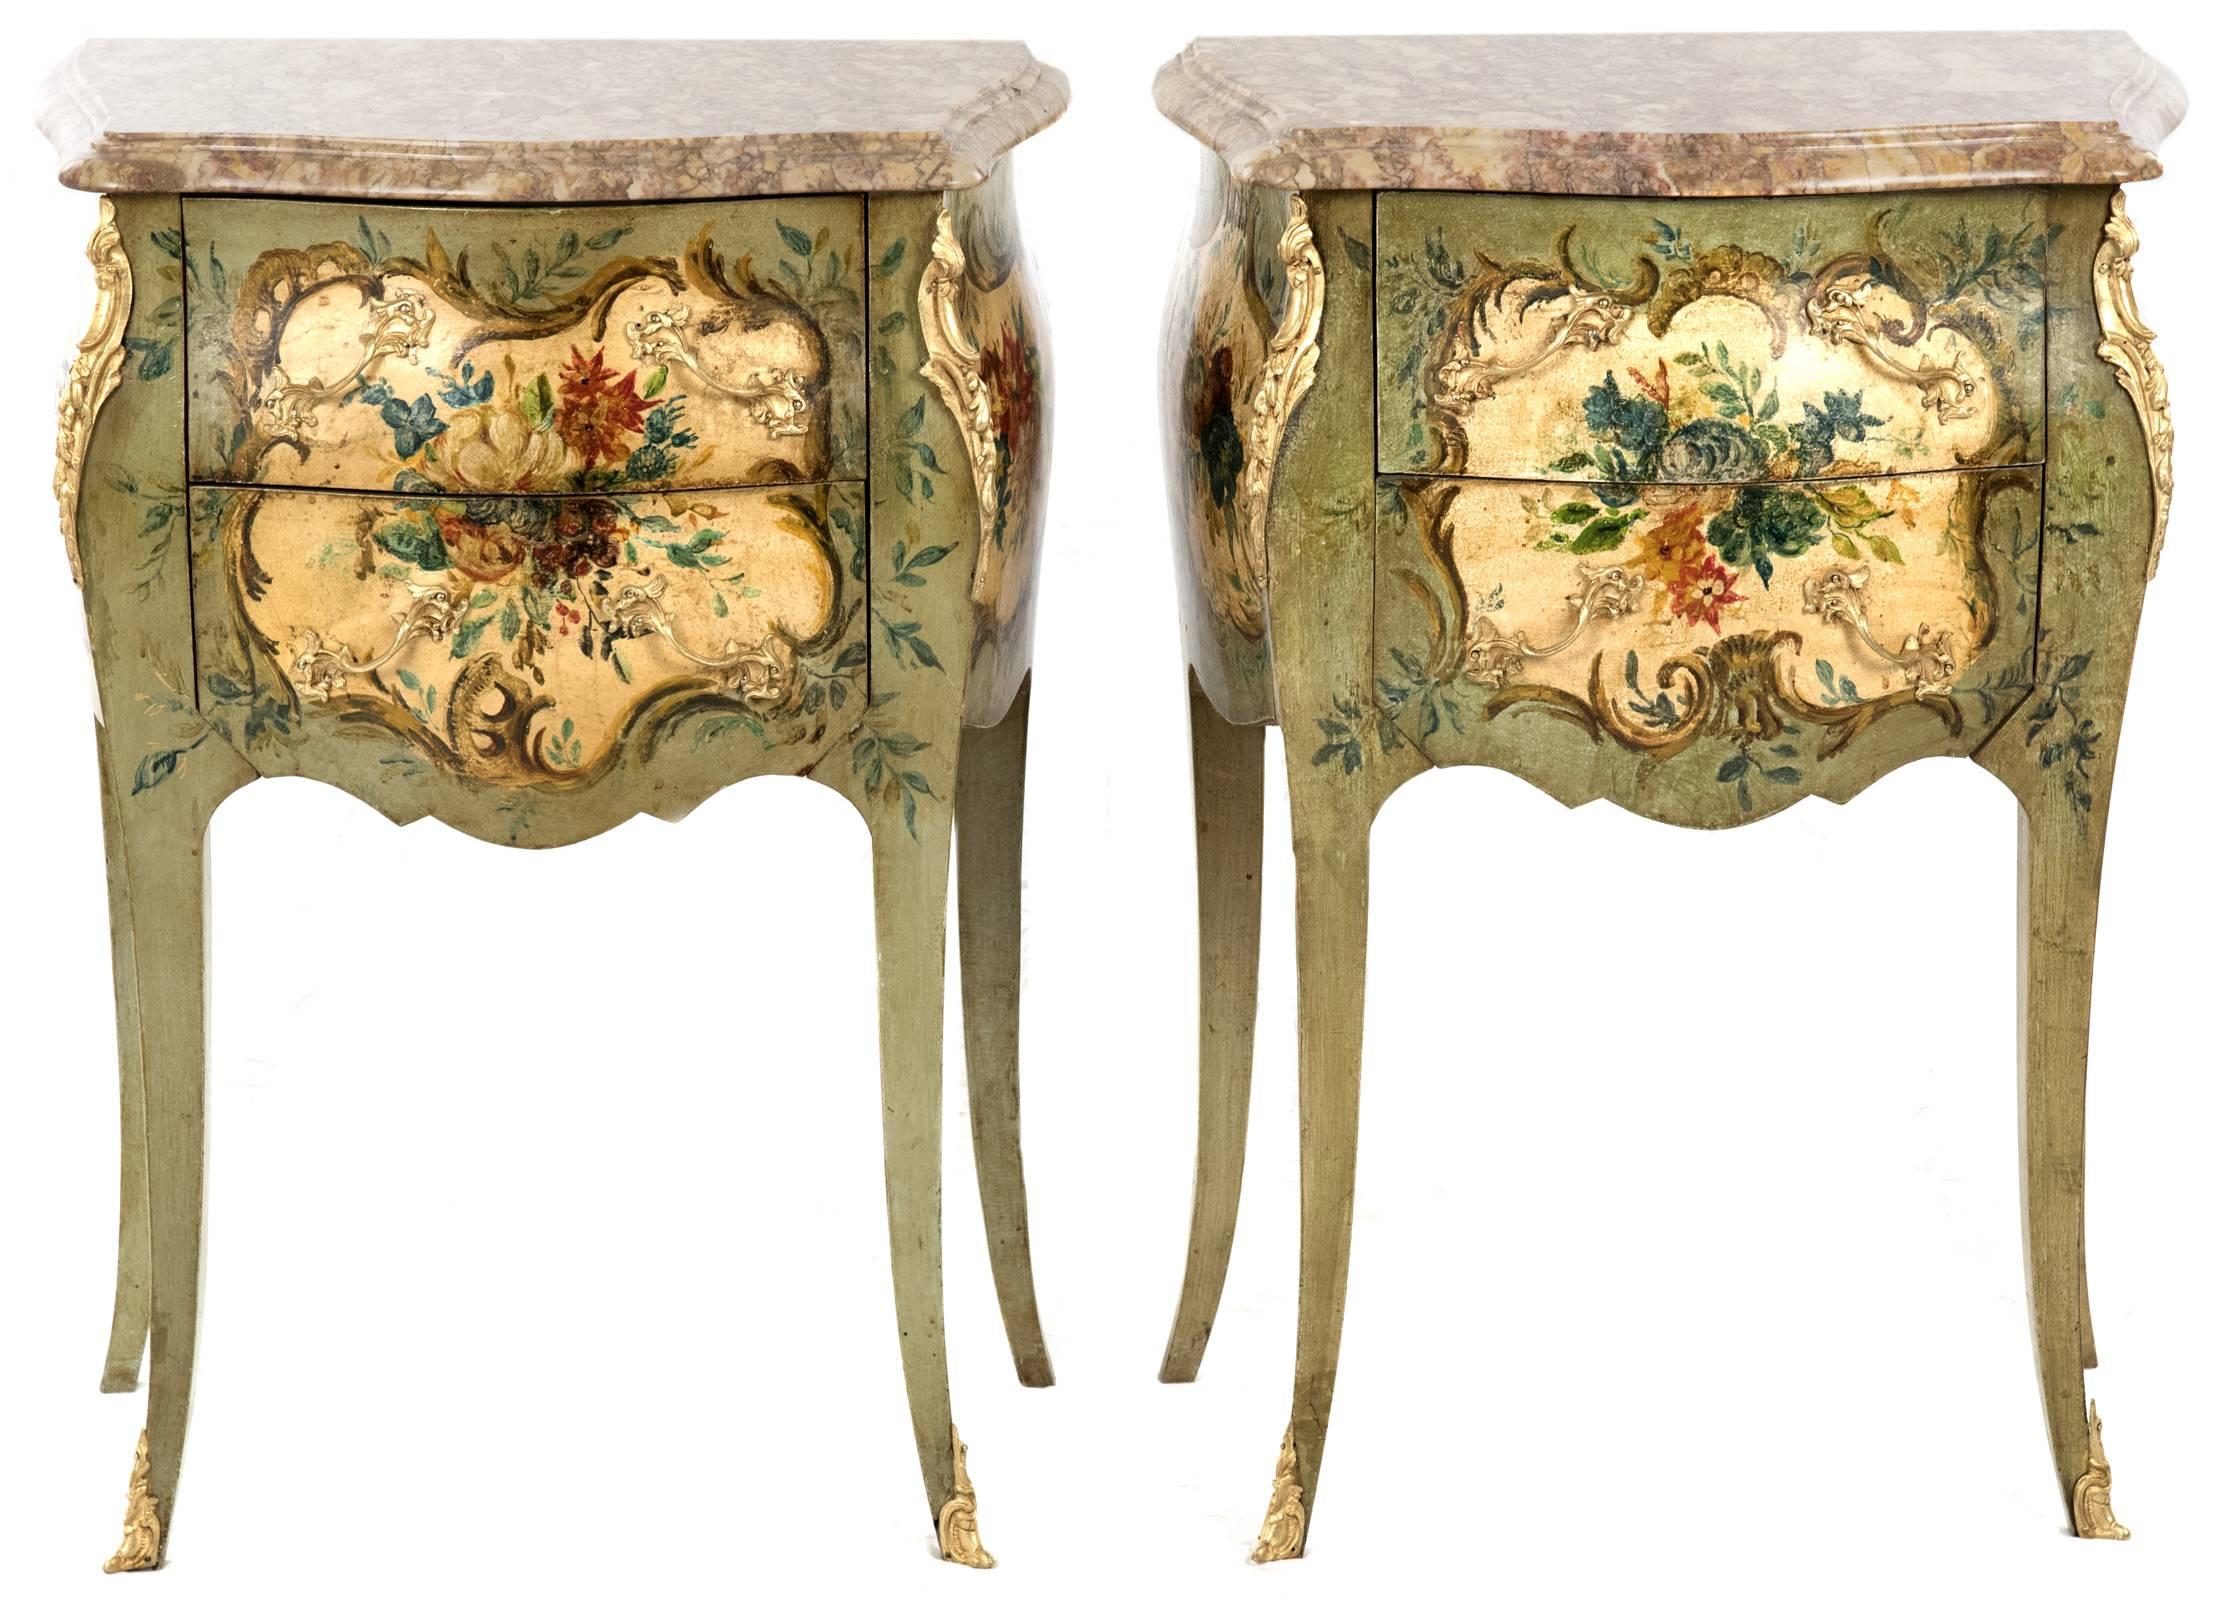 A pair of Rococo Revival bombe shaped nightstands with cases that are beautifully hand-painted with cartouches containing delicate florals and scrolling foliage. The cases have a serpentine-shaped front and curved sides, with each case having two